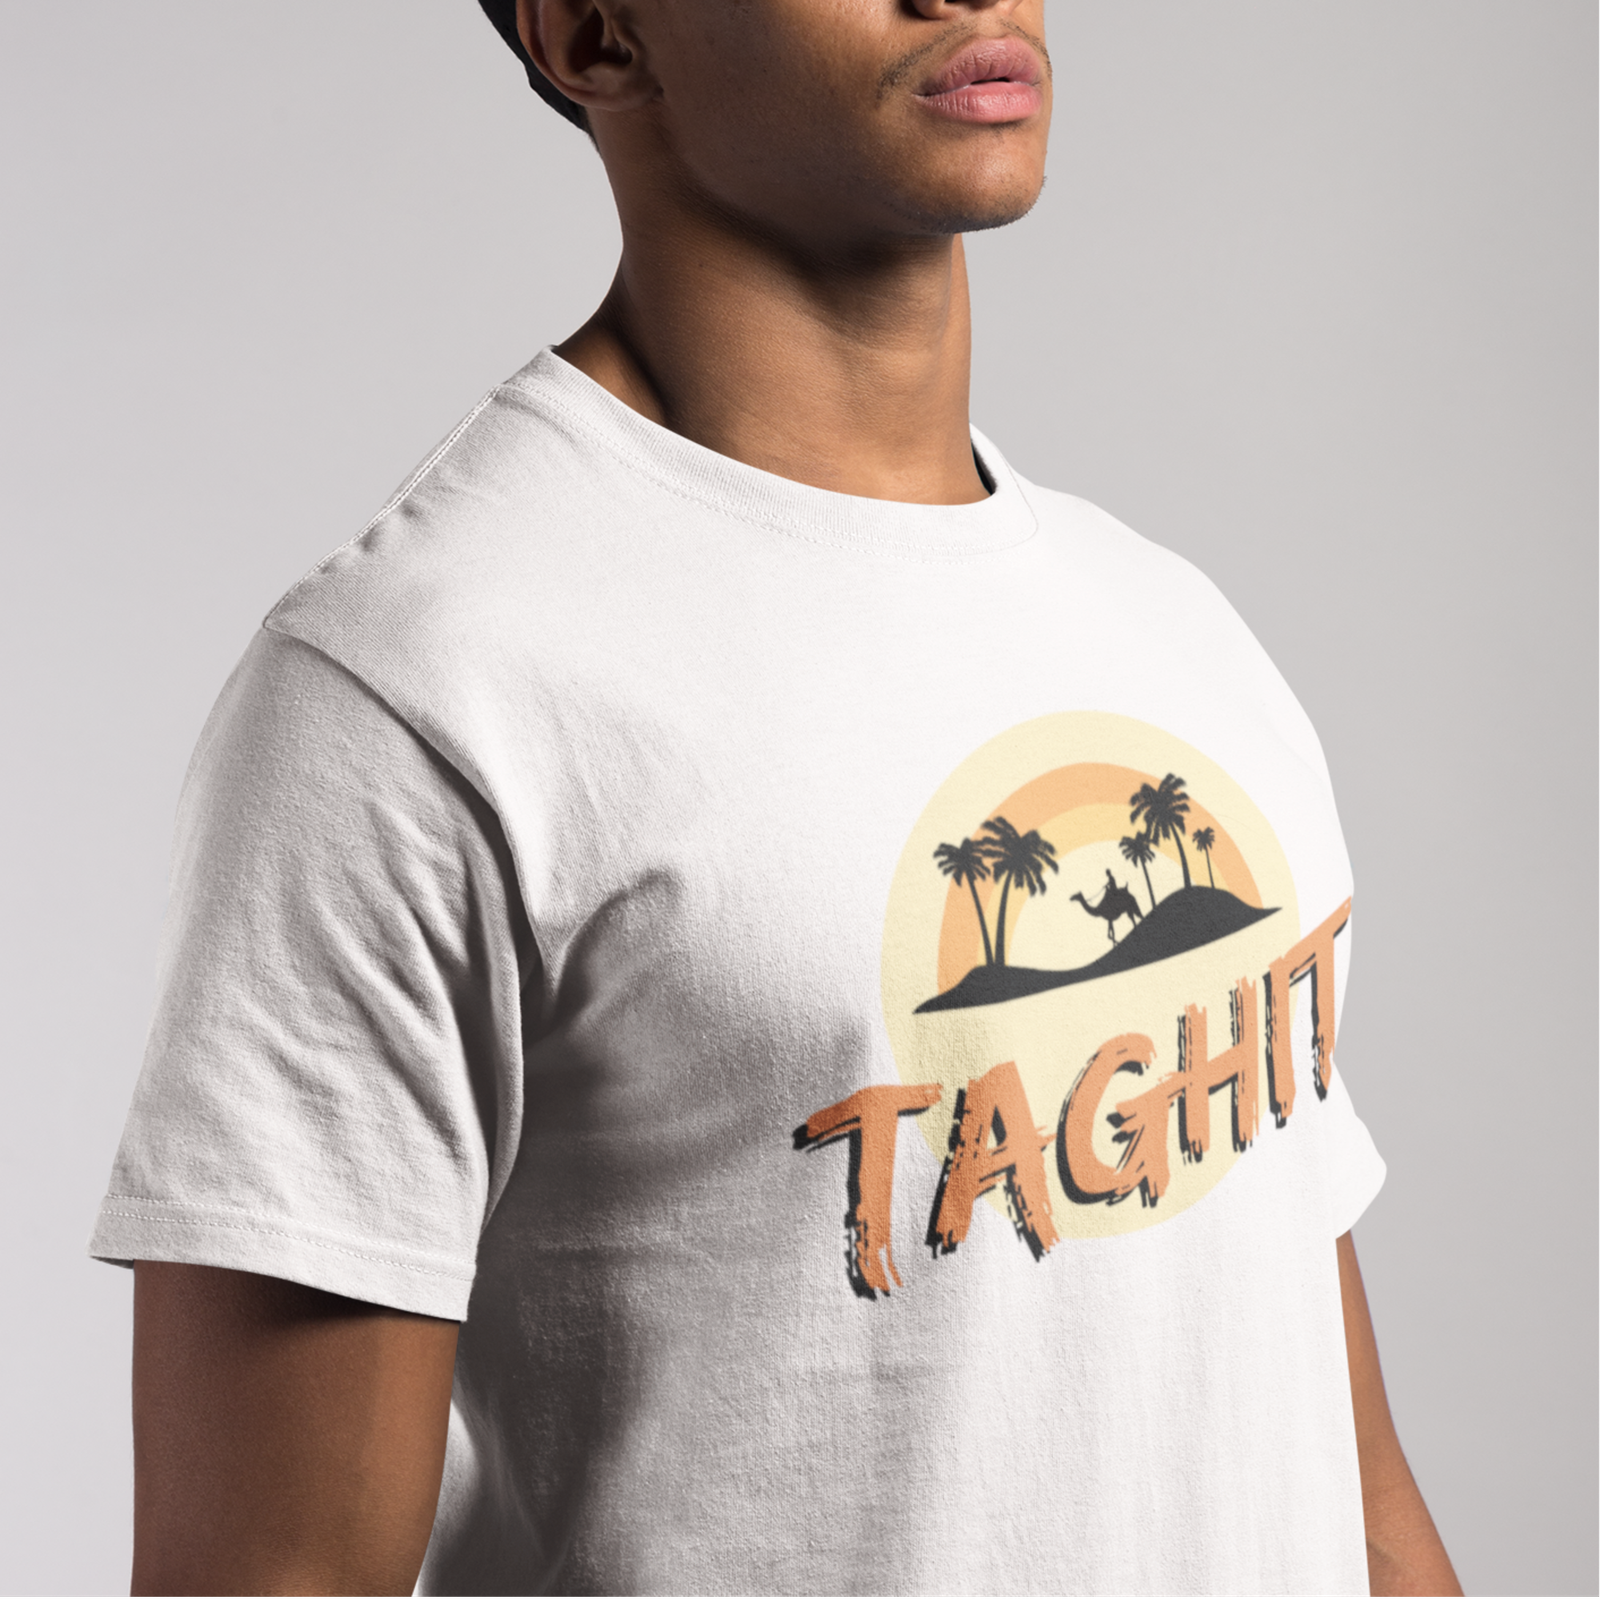 Taghit – T shirt